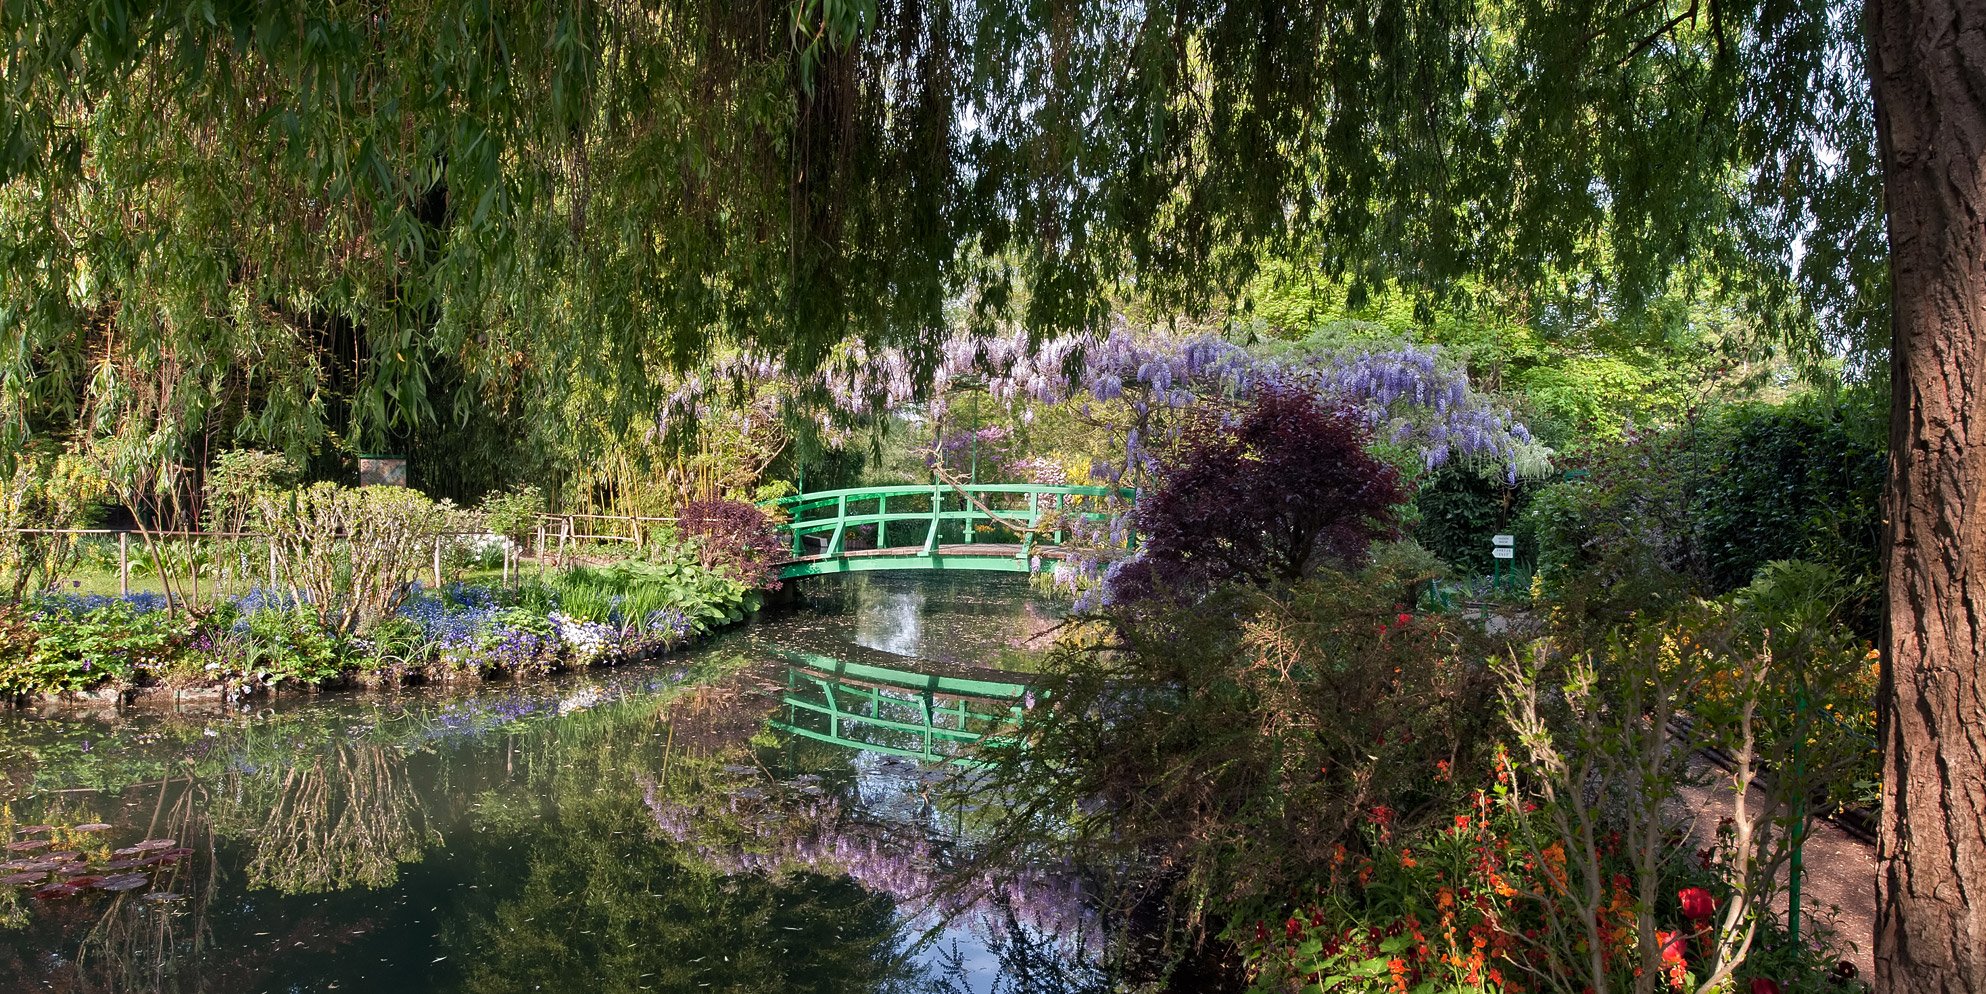   Monet’s Water Garden  | Giverny, France 